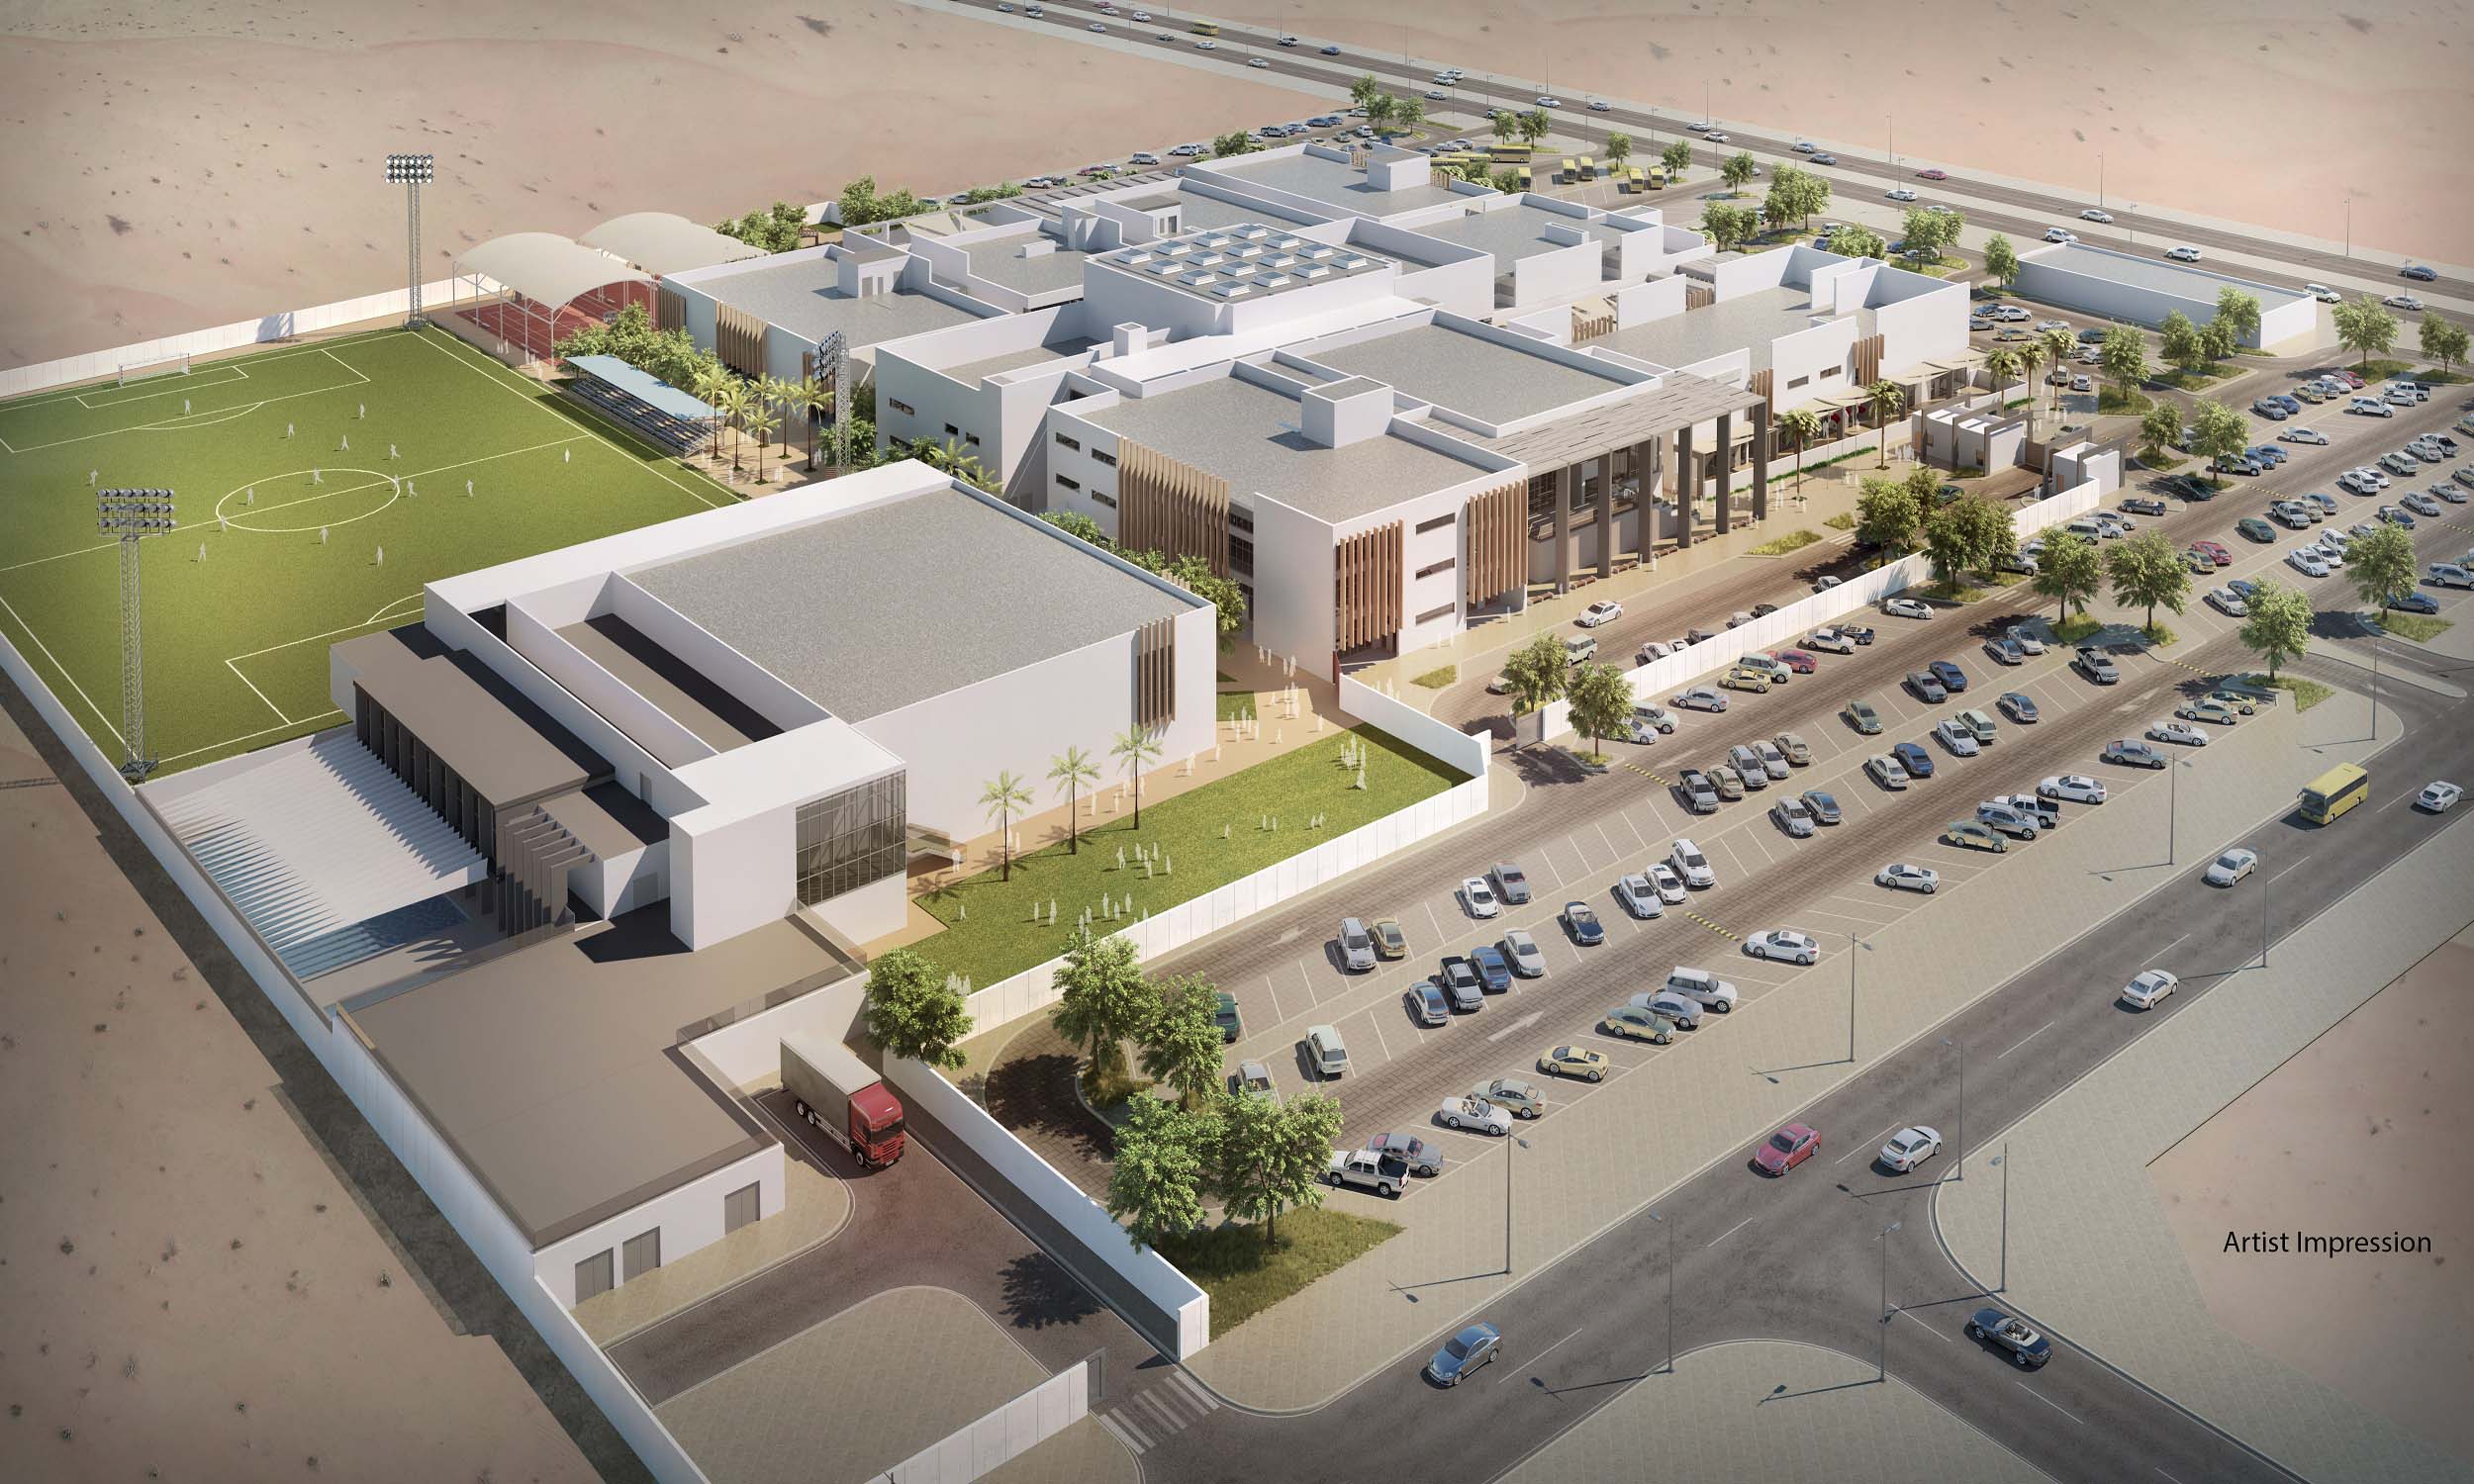 The planned new ACS Doha campus